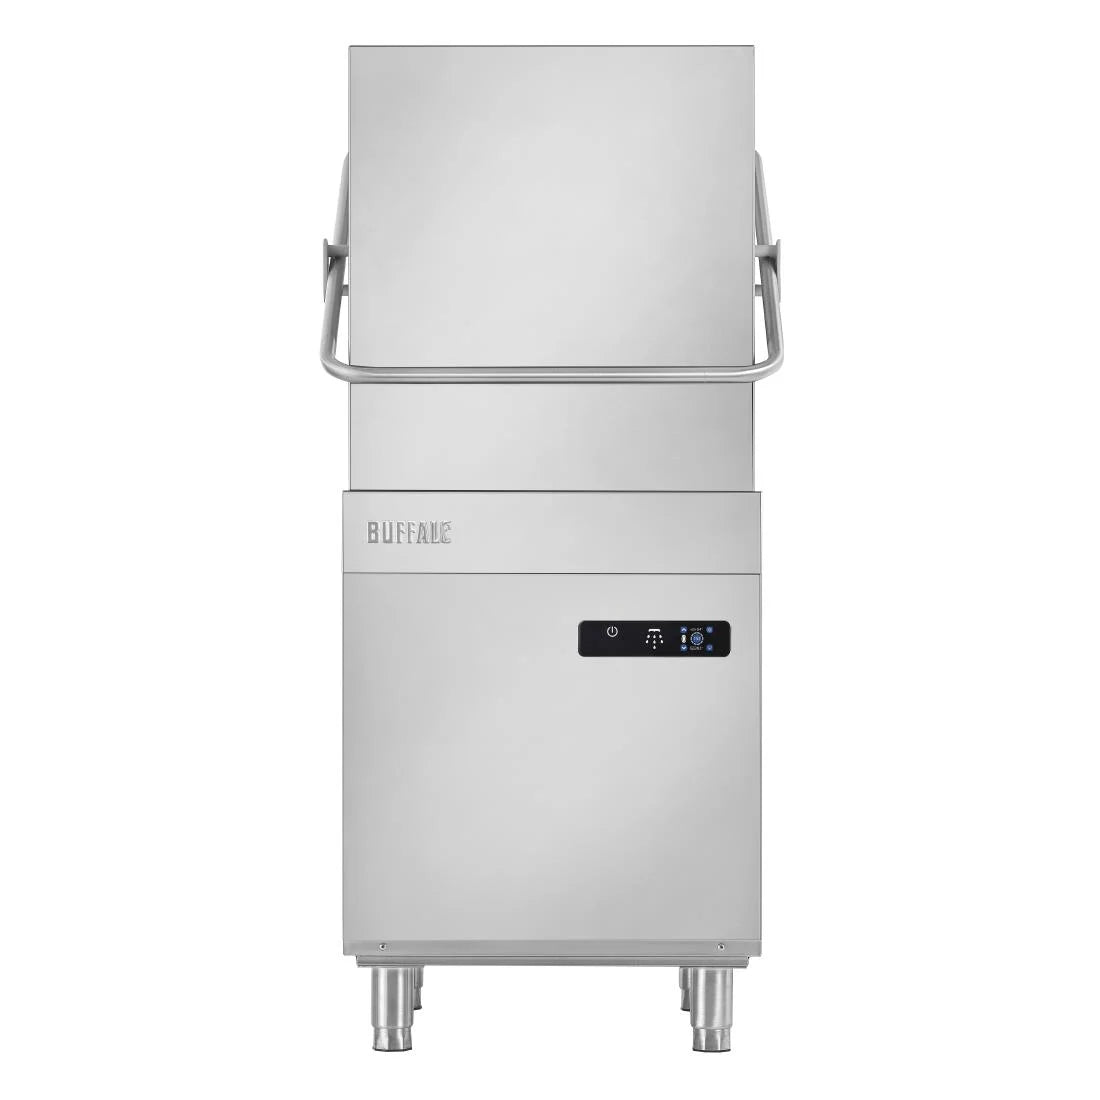 DK775 Buffalo Digital Pass Through Dishwasher 6.6kW Single Phase 30a JD Catering Equipment Solutions Ltd